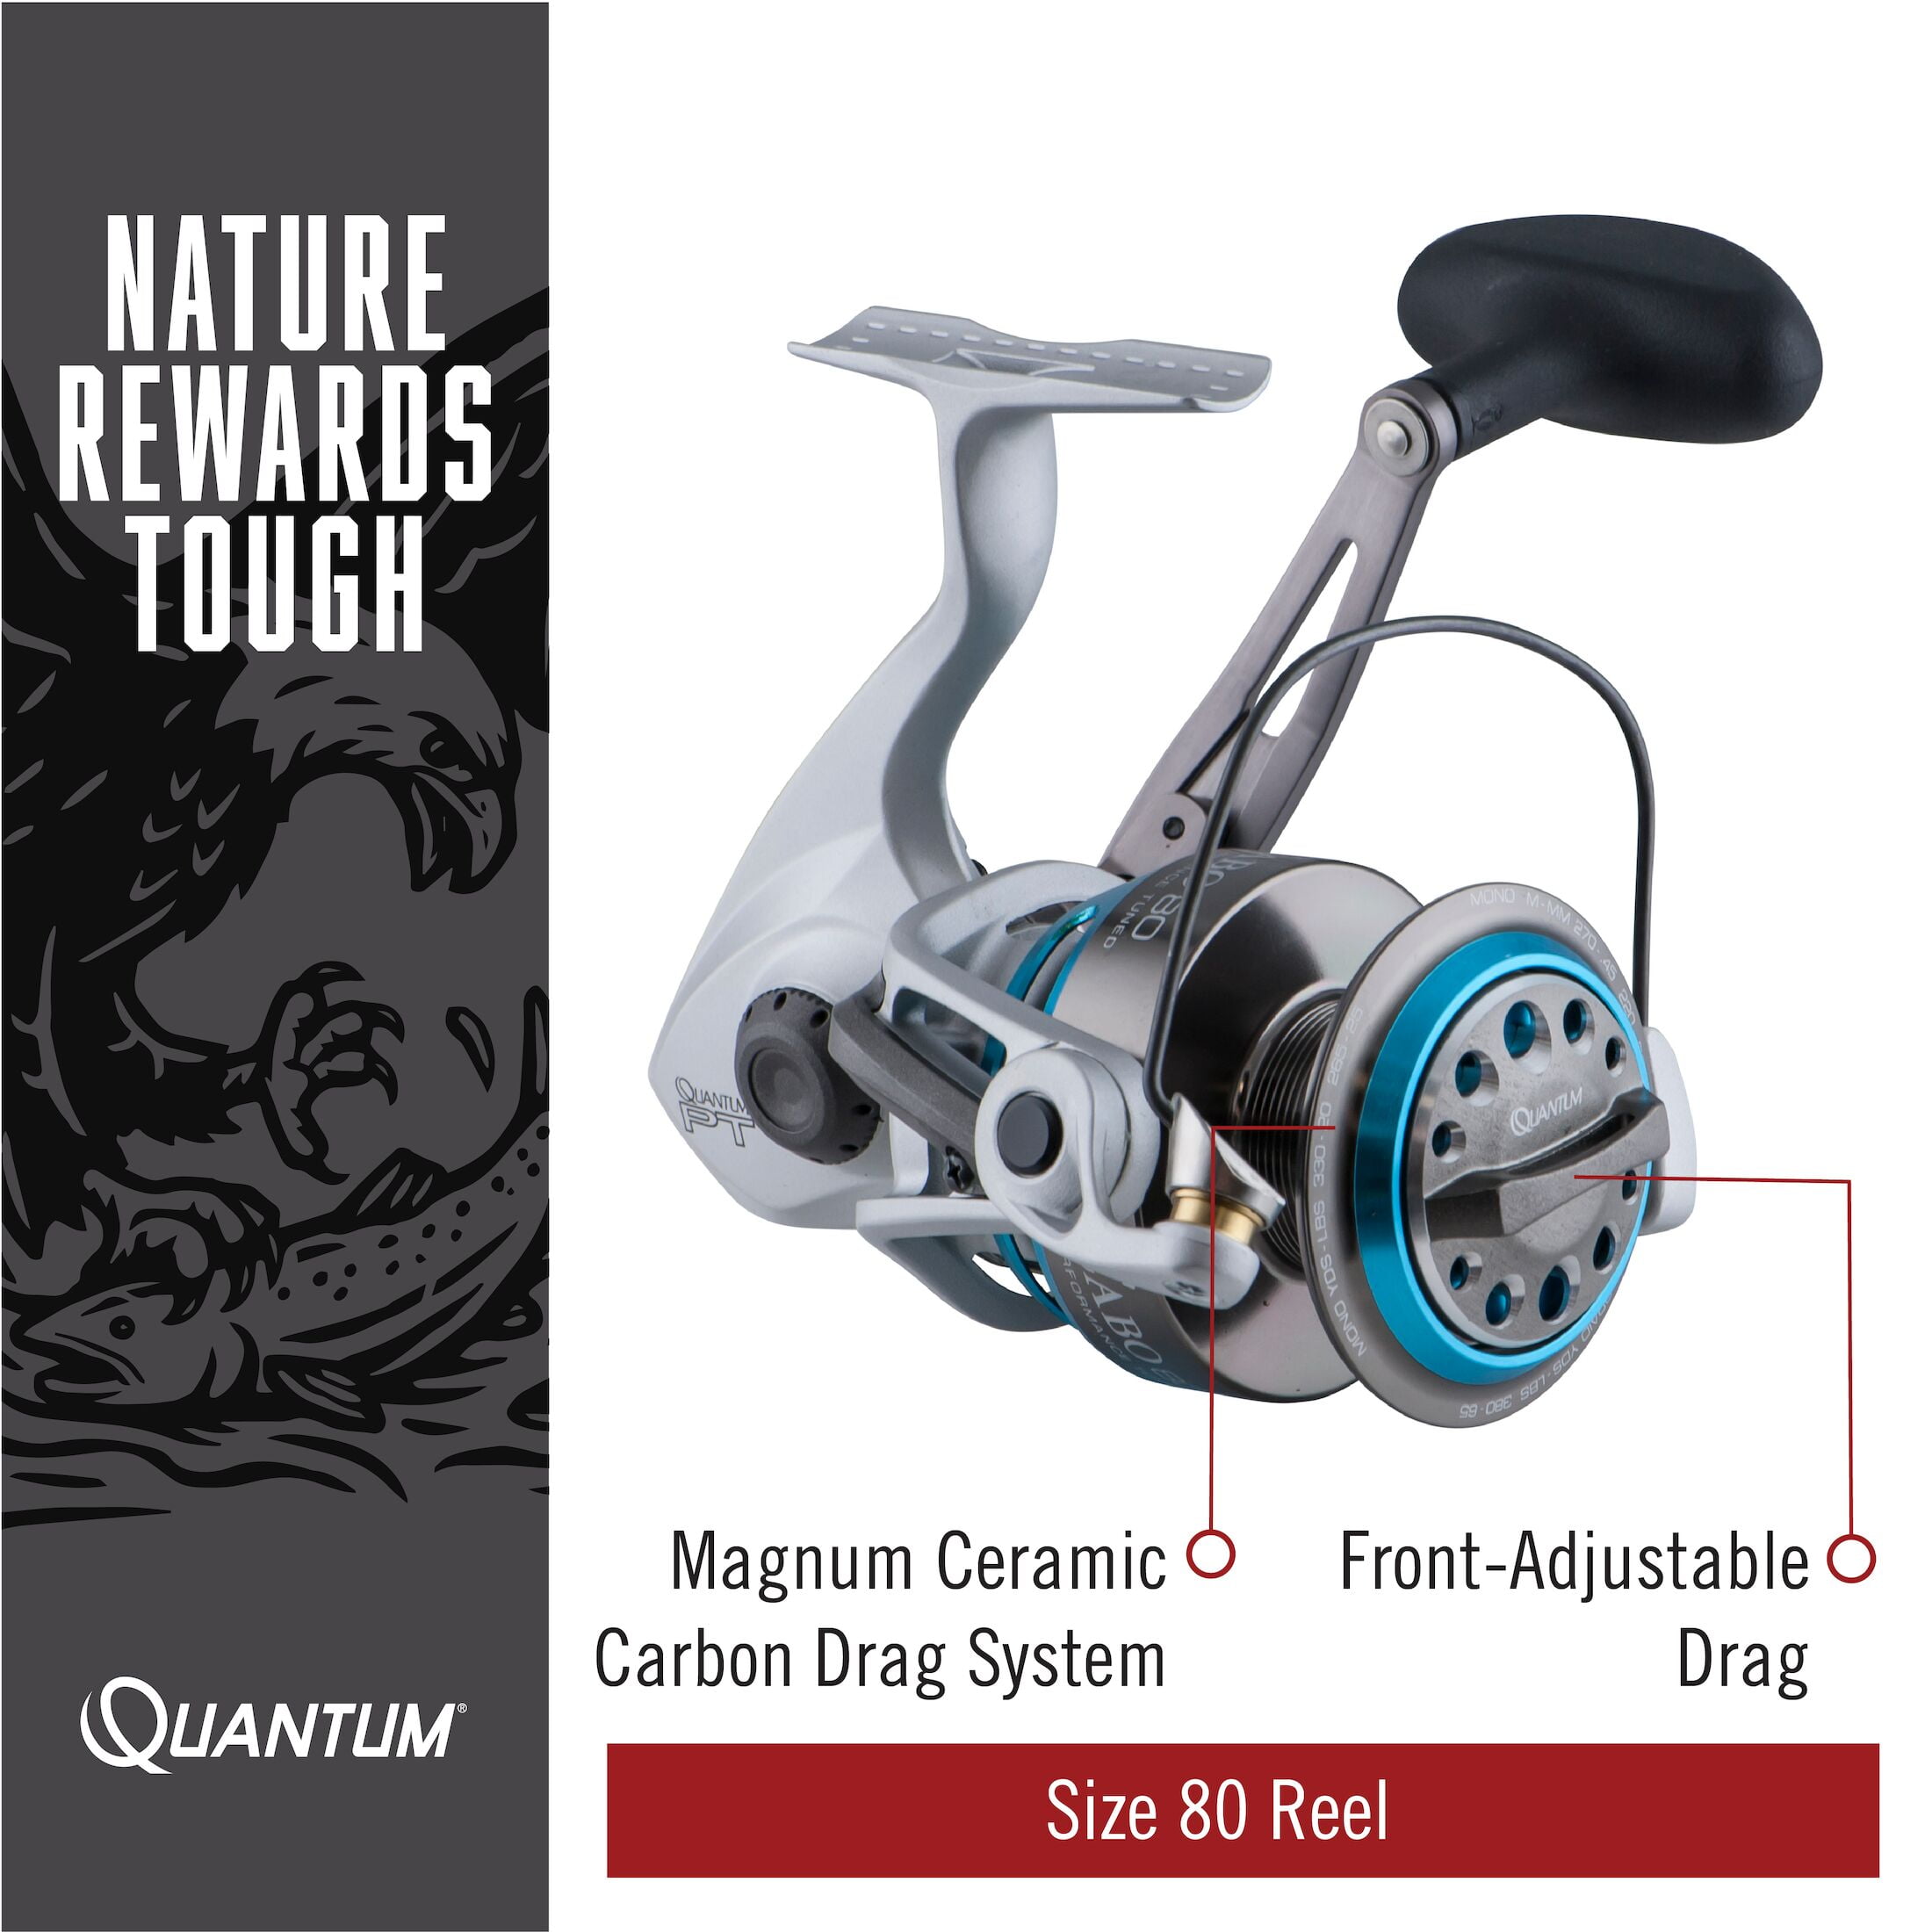 Quantum Cabo Saltwater Spinning Fishing Reel, Size 60 Reel, Silver/Blue 